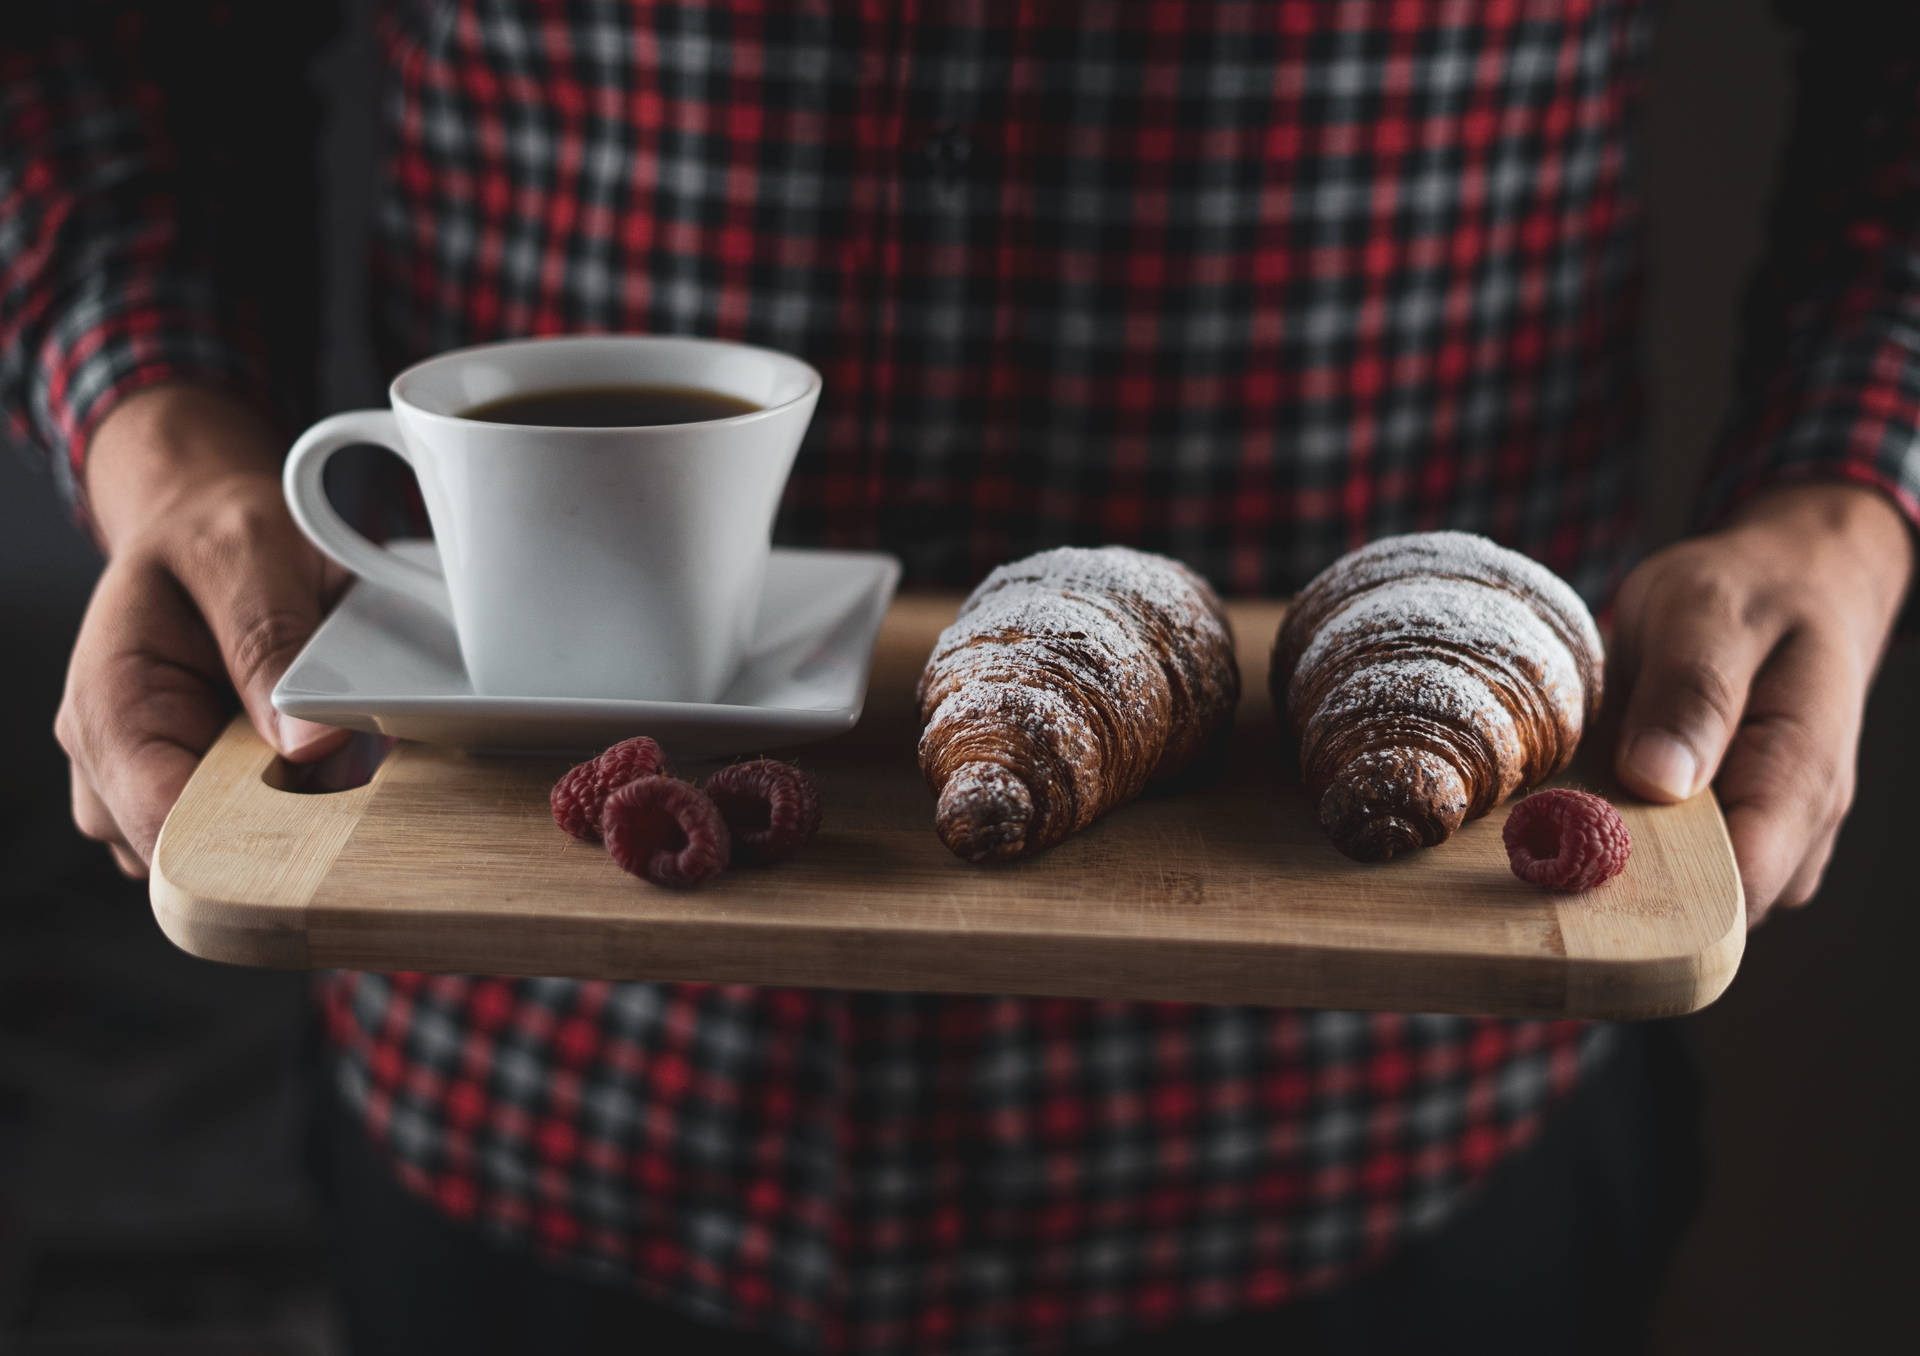 Kaffeoch Croissant-bakverk. (note: A Native Swedish Speaker Would Likely Not Translate The Phrase Specifically In Context Of Computer Or Mobile Wallpaper As The Phrase Itself Does Not Pertain To This Topic.) Wallpaper